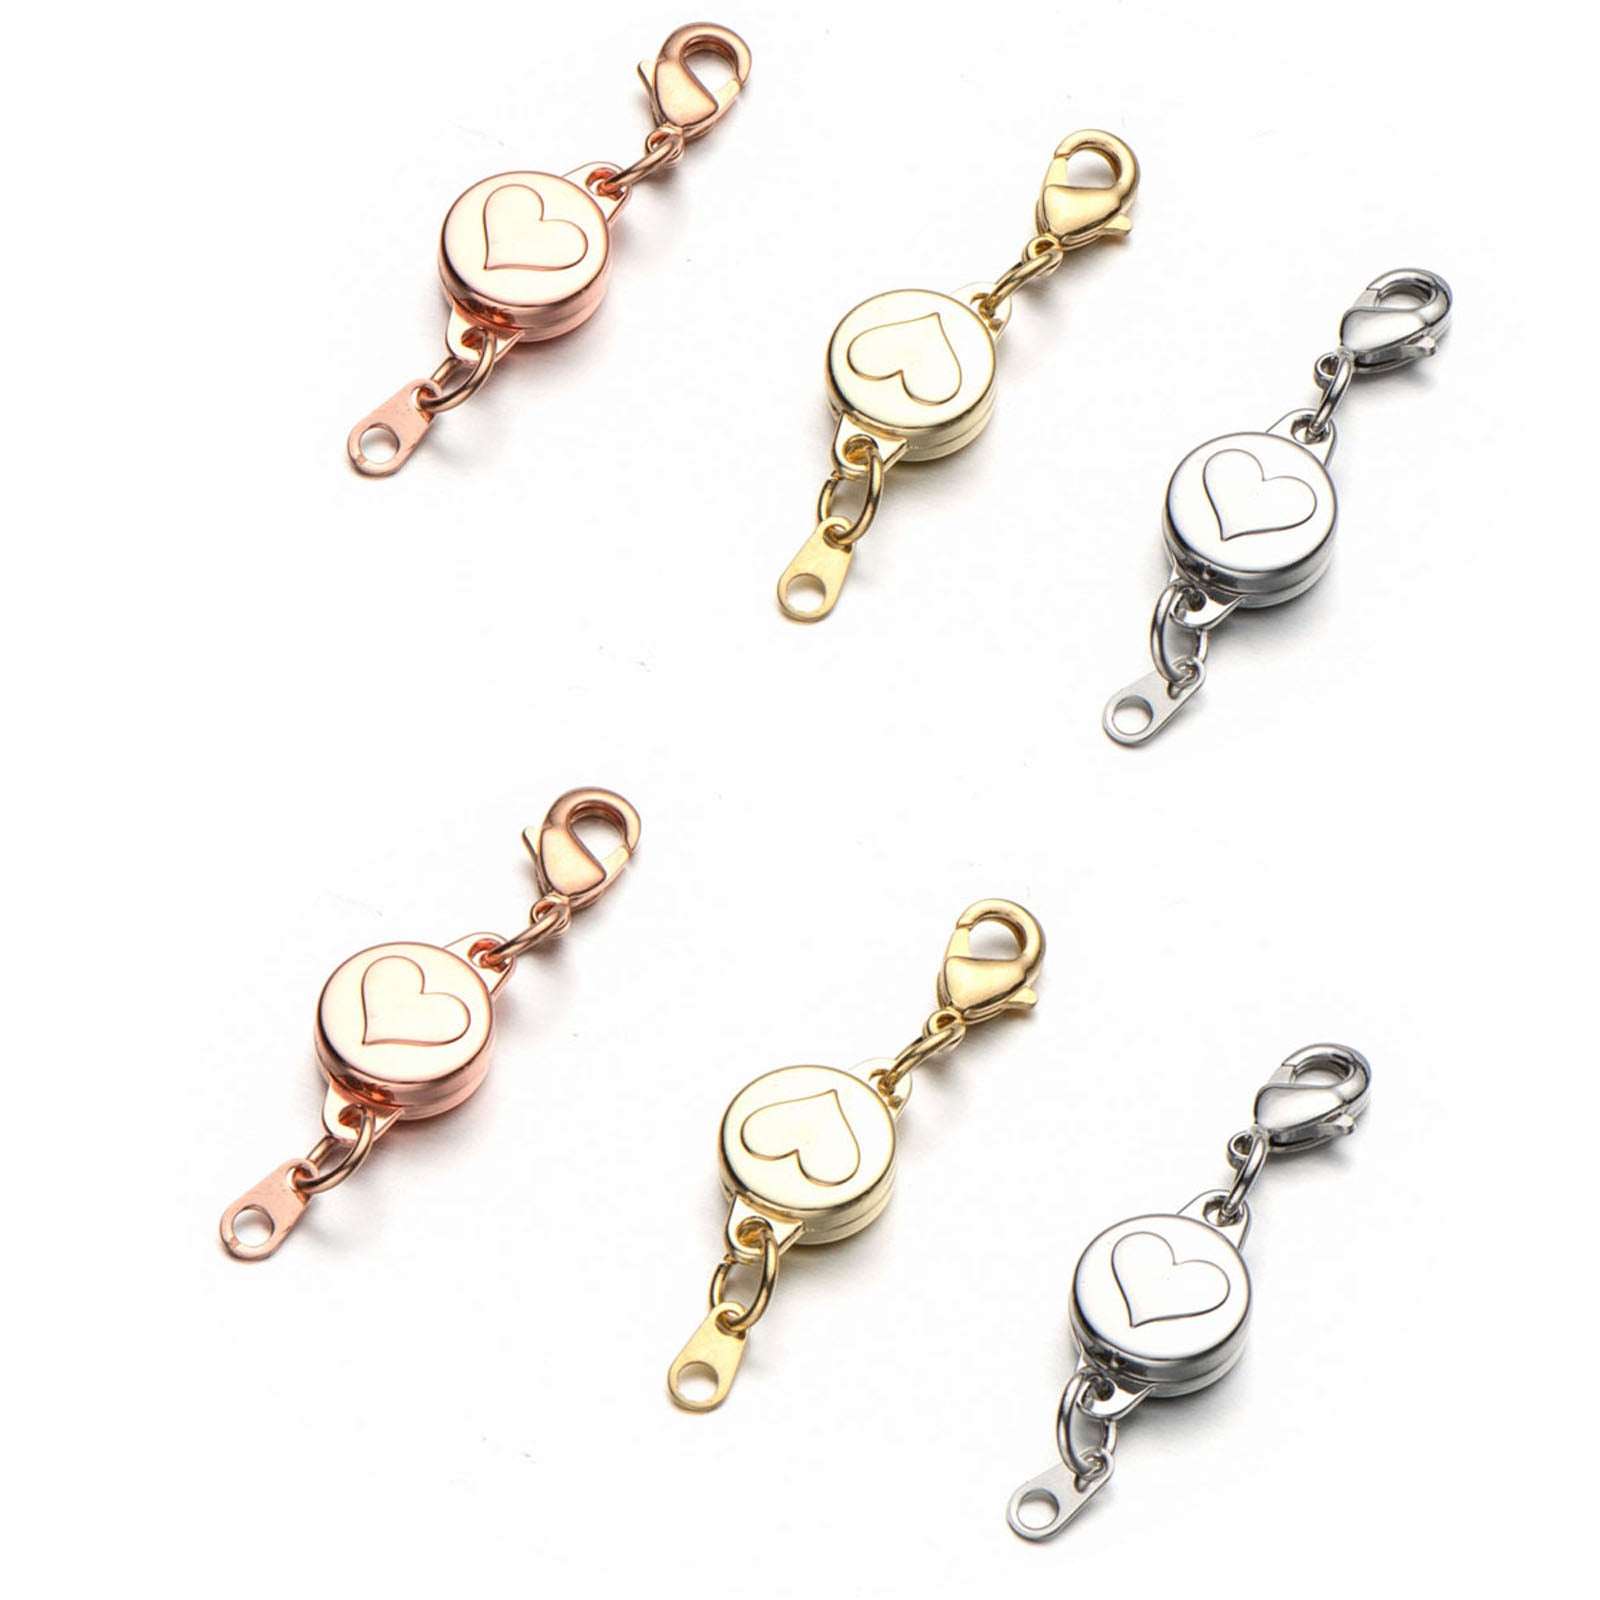 Built-in Safety Locking Magnetic Jewelry Clasp For Necklace And Bracelet  Light